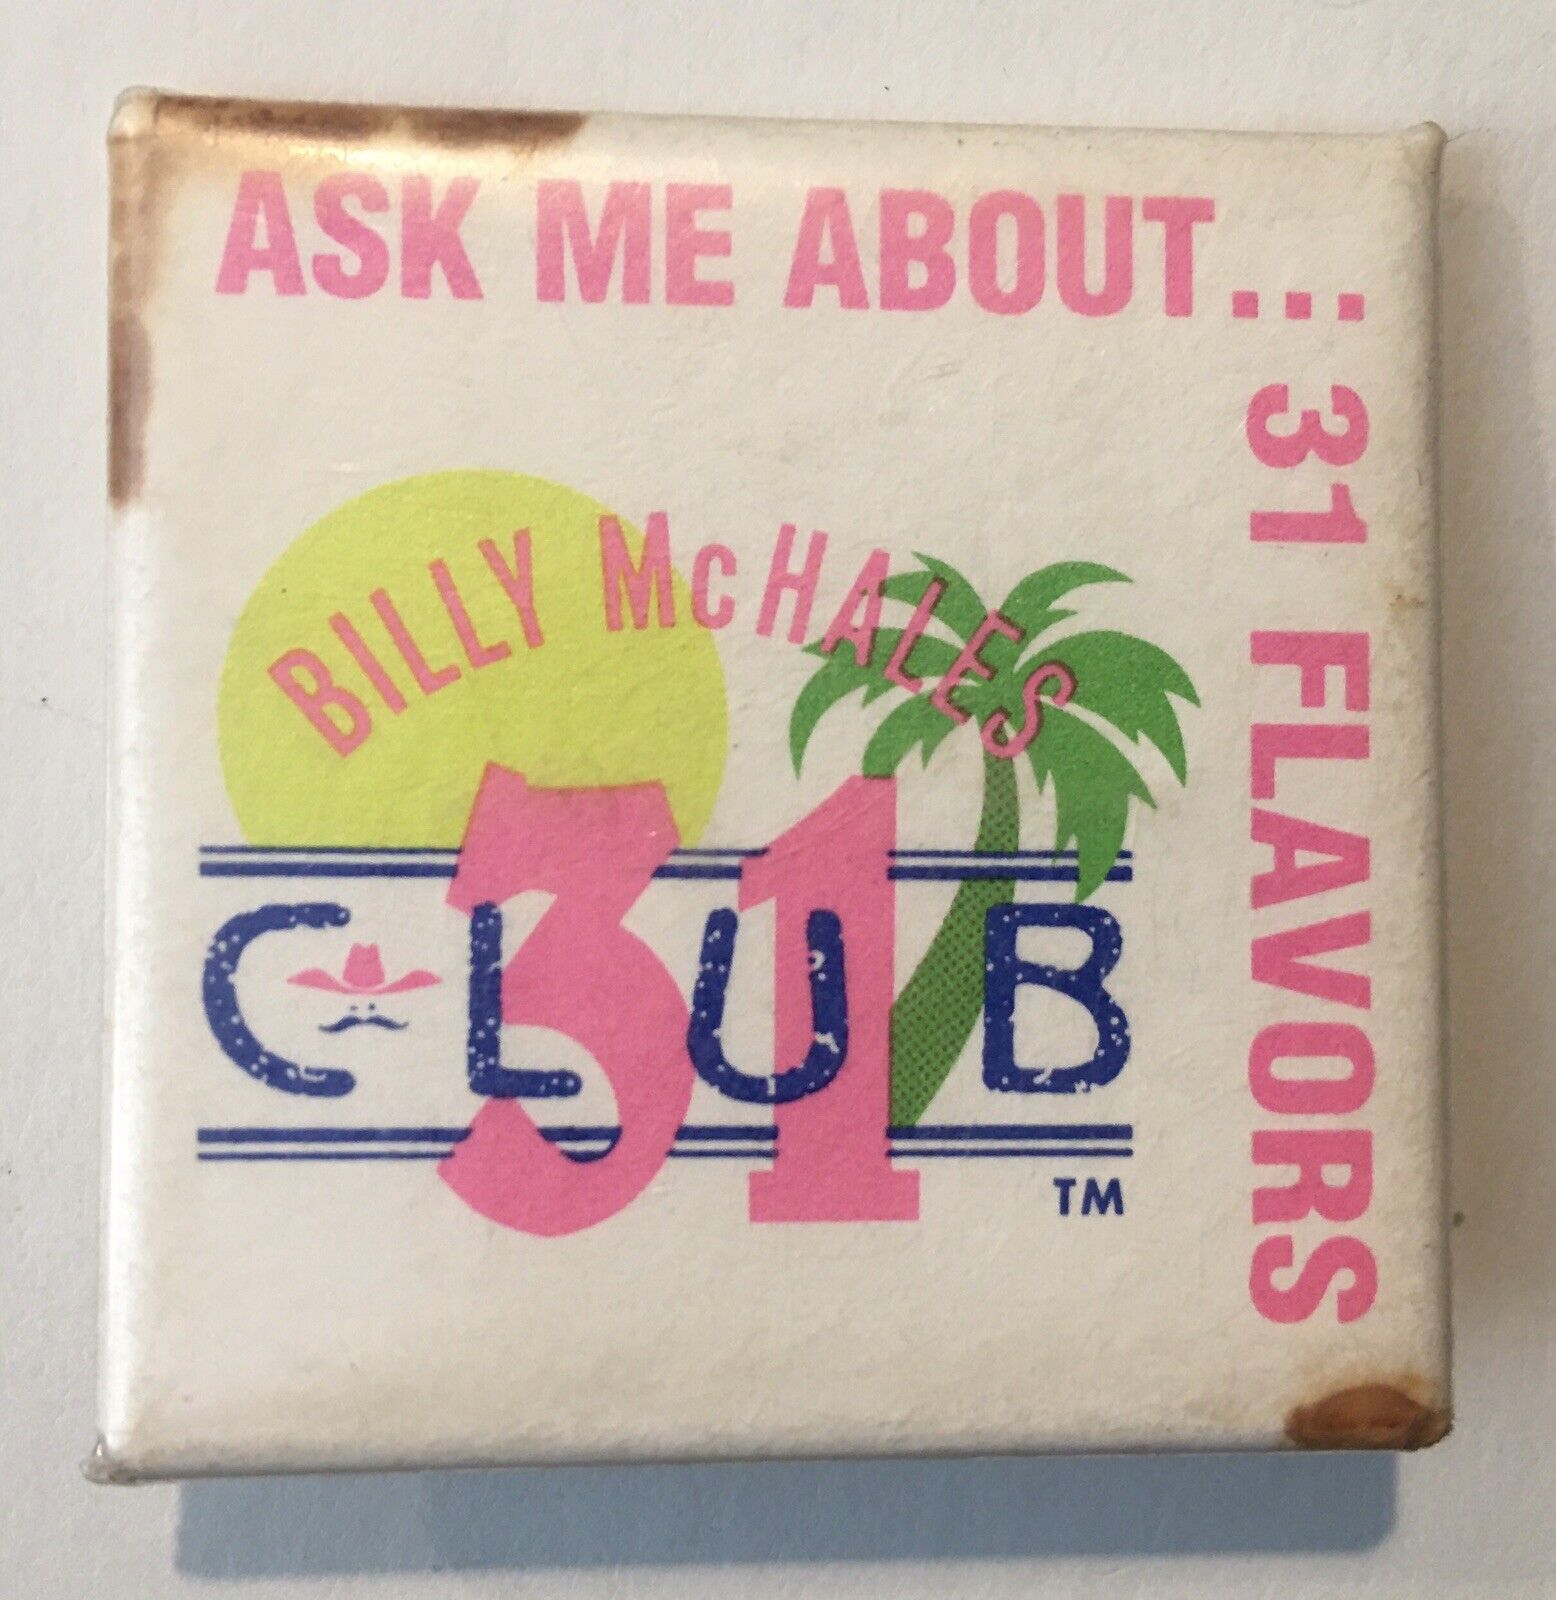 Billy McHales 31 Club™ Pinback Button 2” X 2” Ask Me About… 31 Flavors